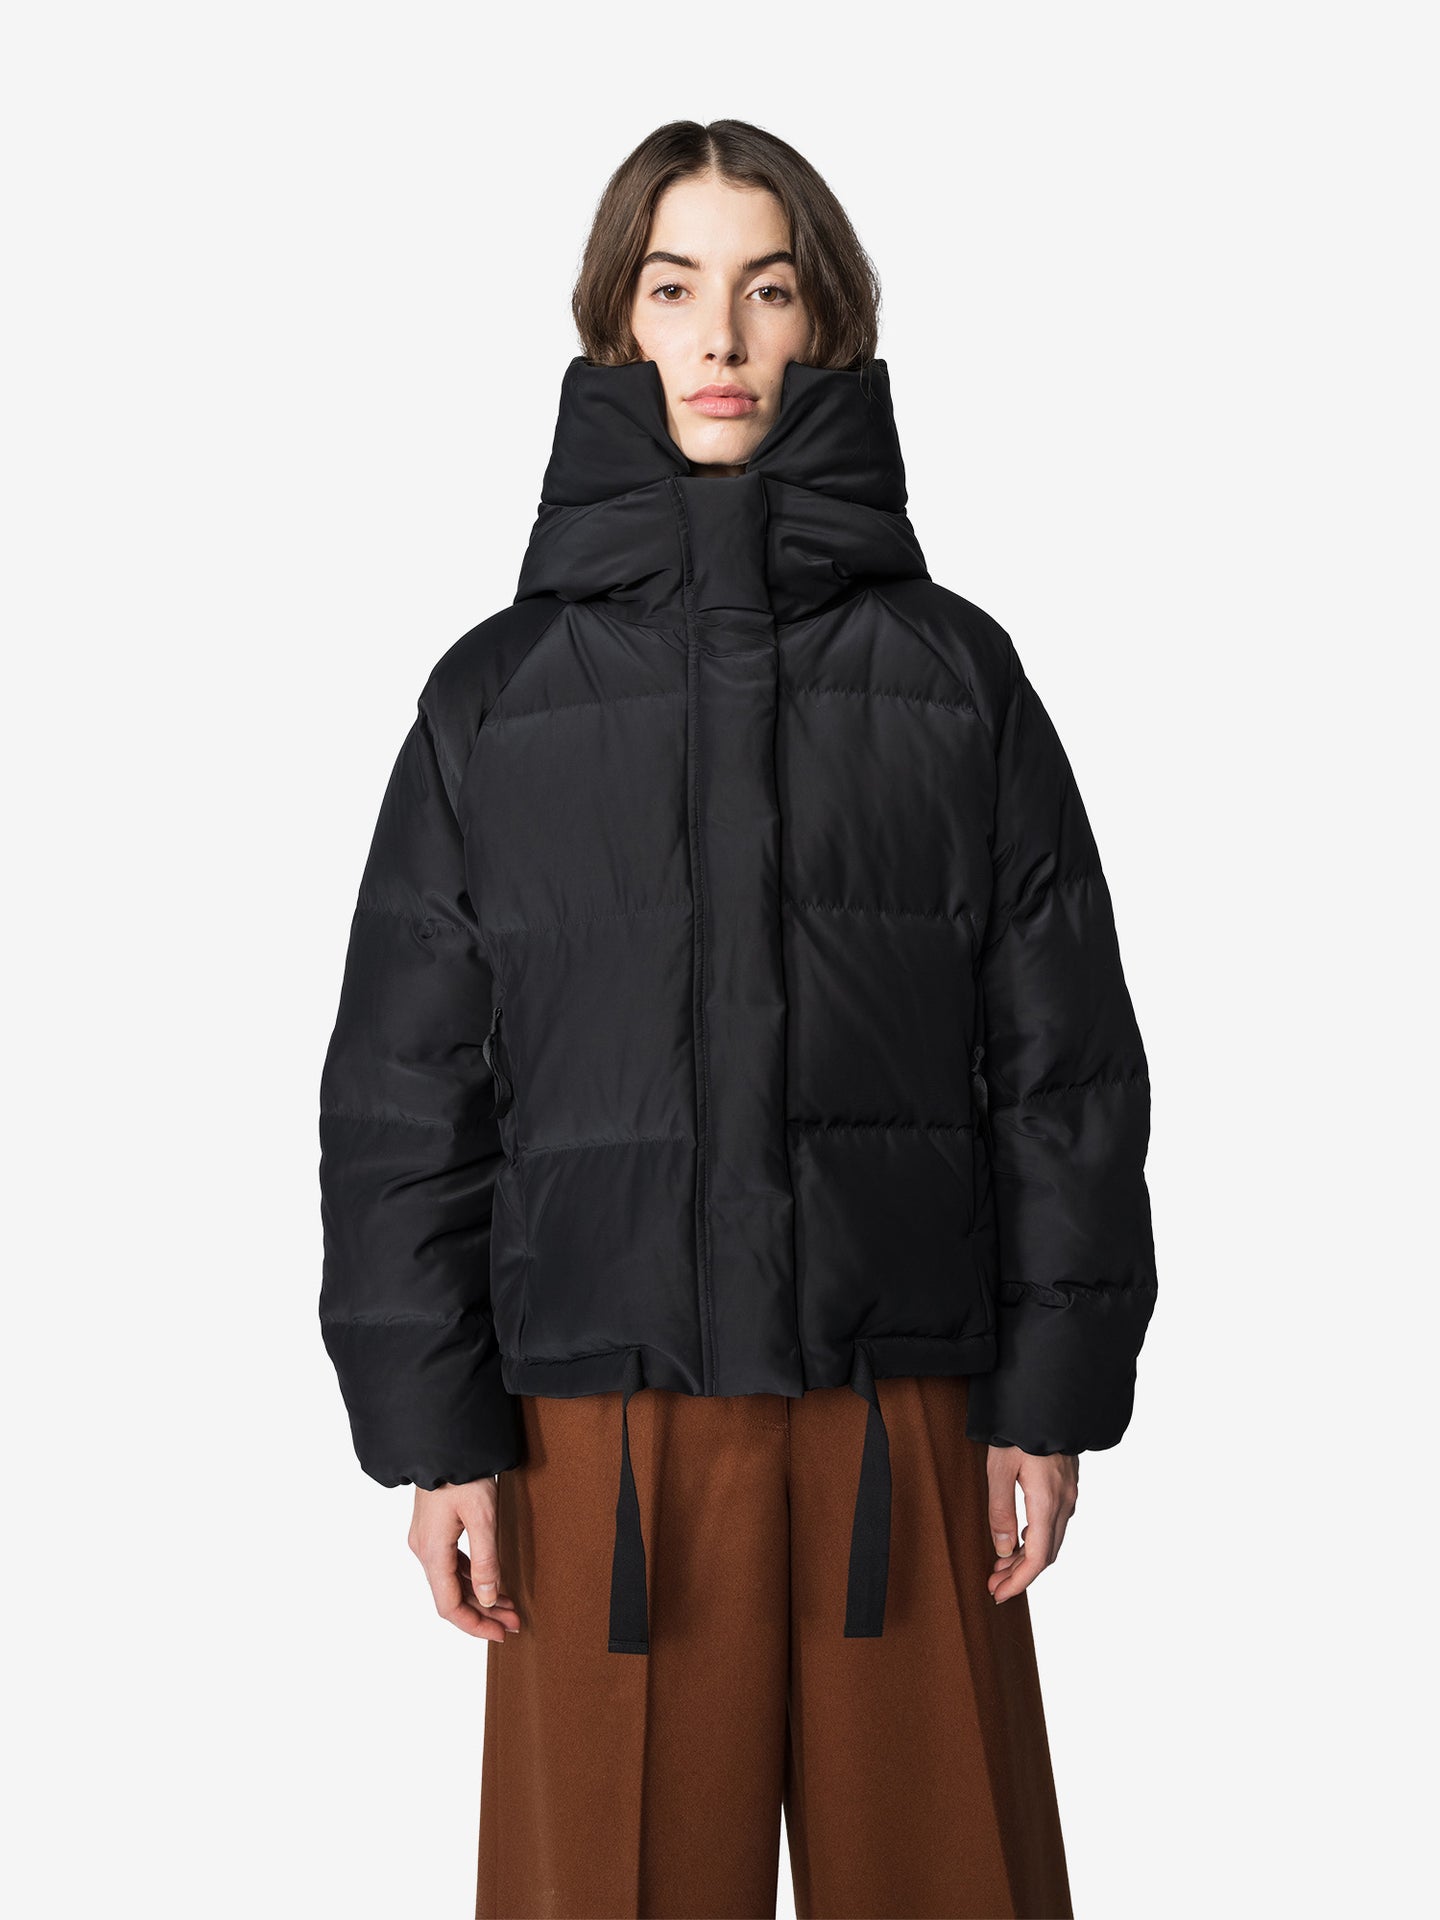 HOLDEN - Women's Outerwear - Contemporary aesthetics and performance ...